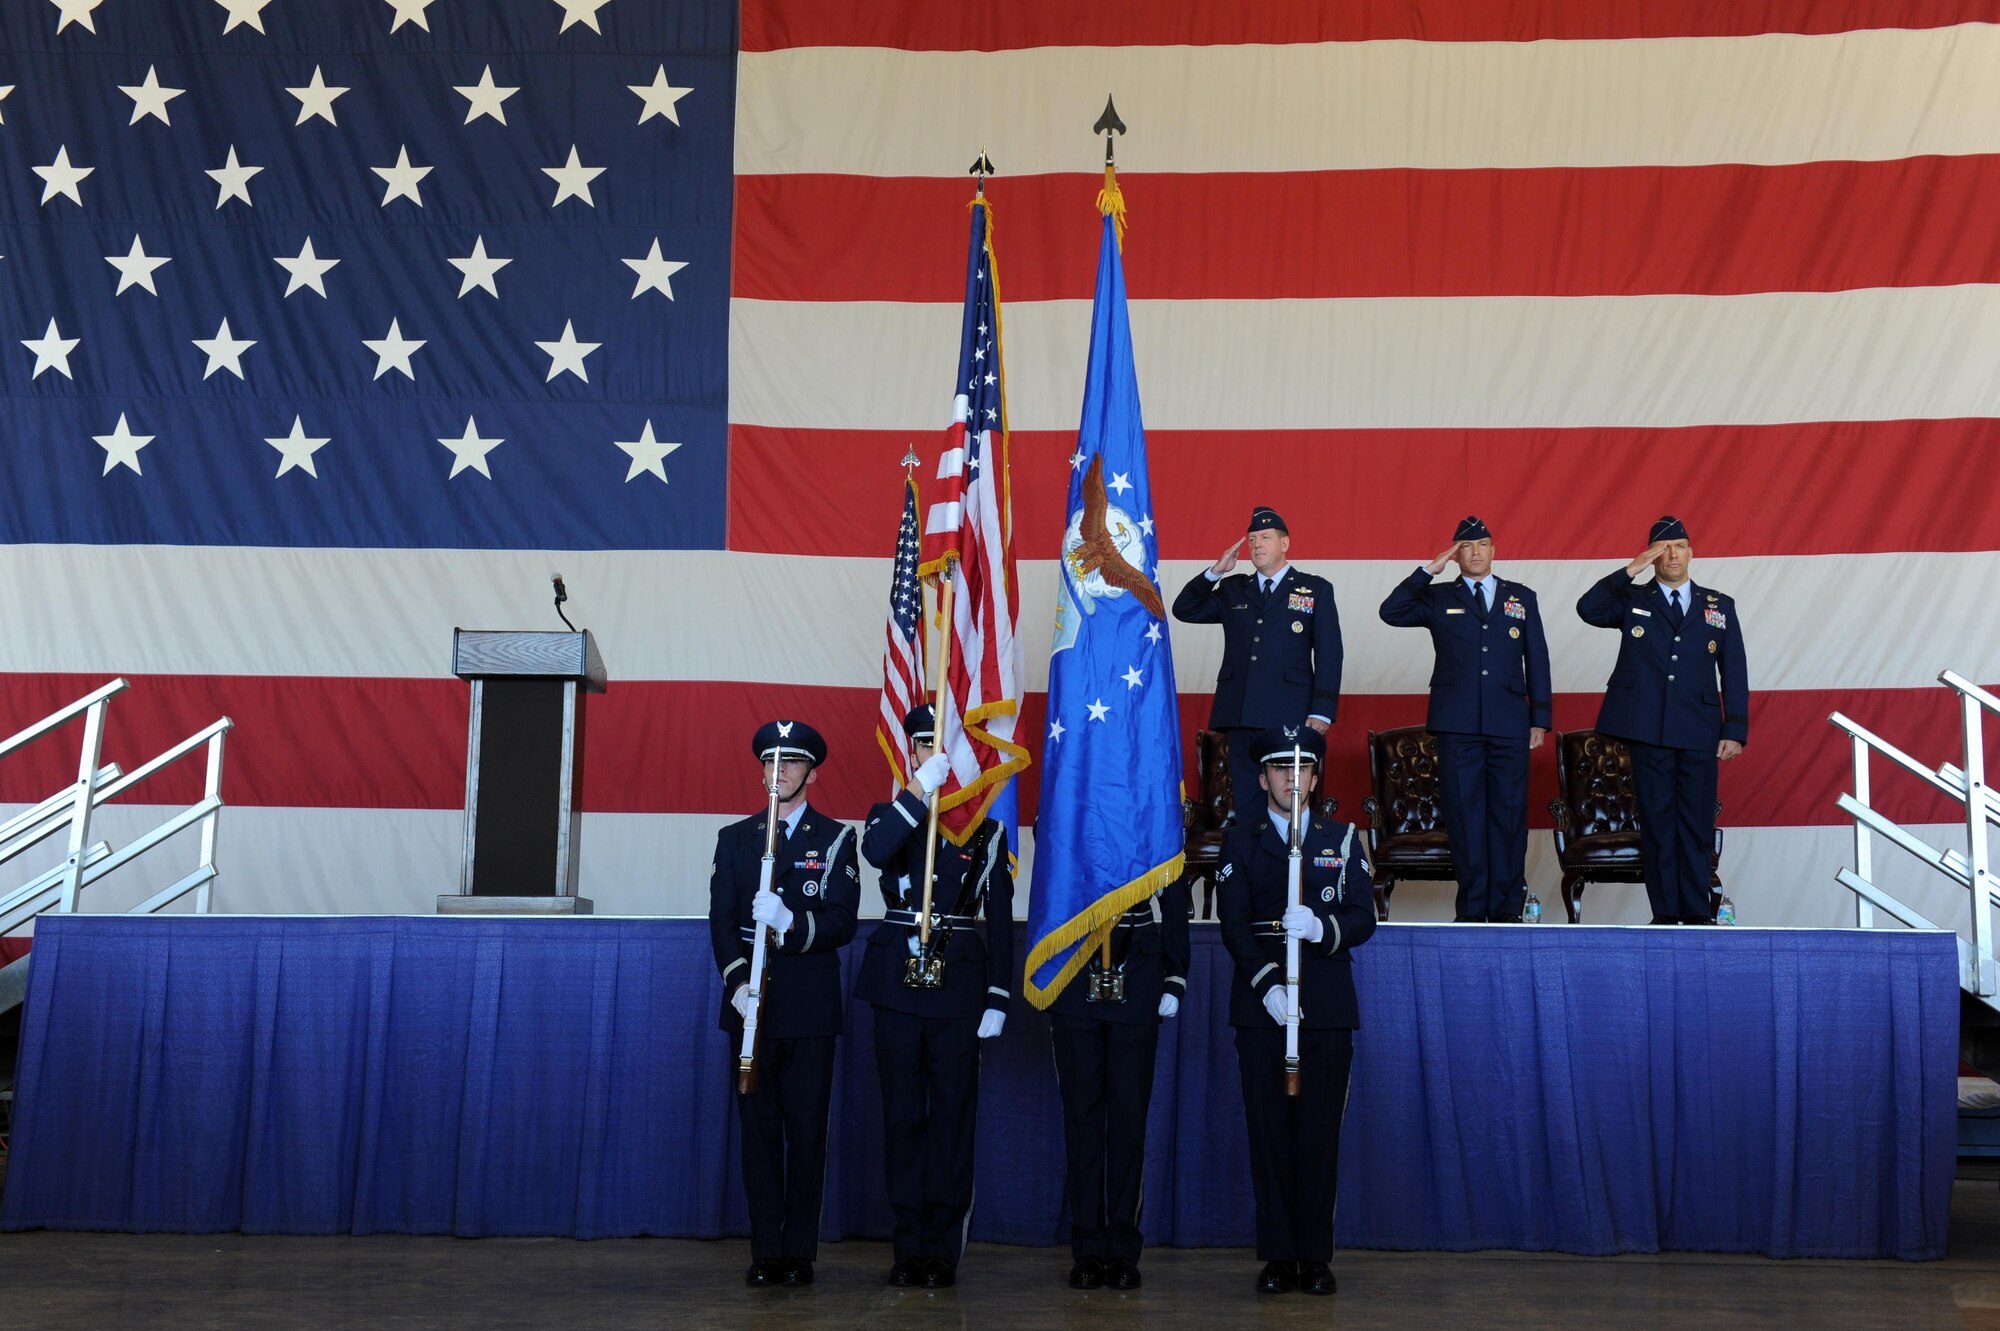 The Luke Air Force Base honor guardsmen present the colors during the 56th Fighter Wing change of command July 13, 2016 at Luke Air Force Base, Arizona. The change of command ceremony is a military tradition, deeply rooted in history dating back to the time of Frederick the Great of Prussia. (U.S. Air Force photo by Airman 1st Class Pedro Mota)